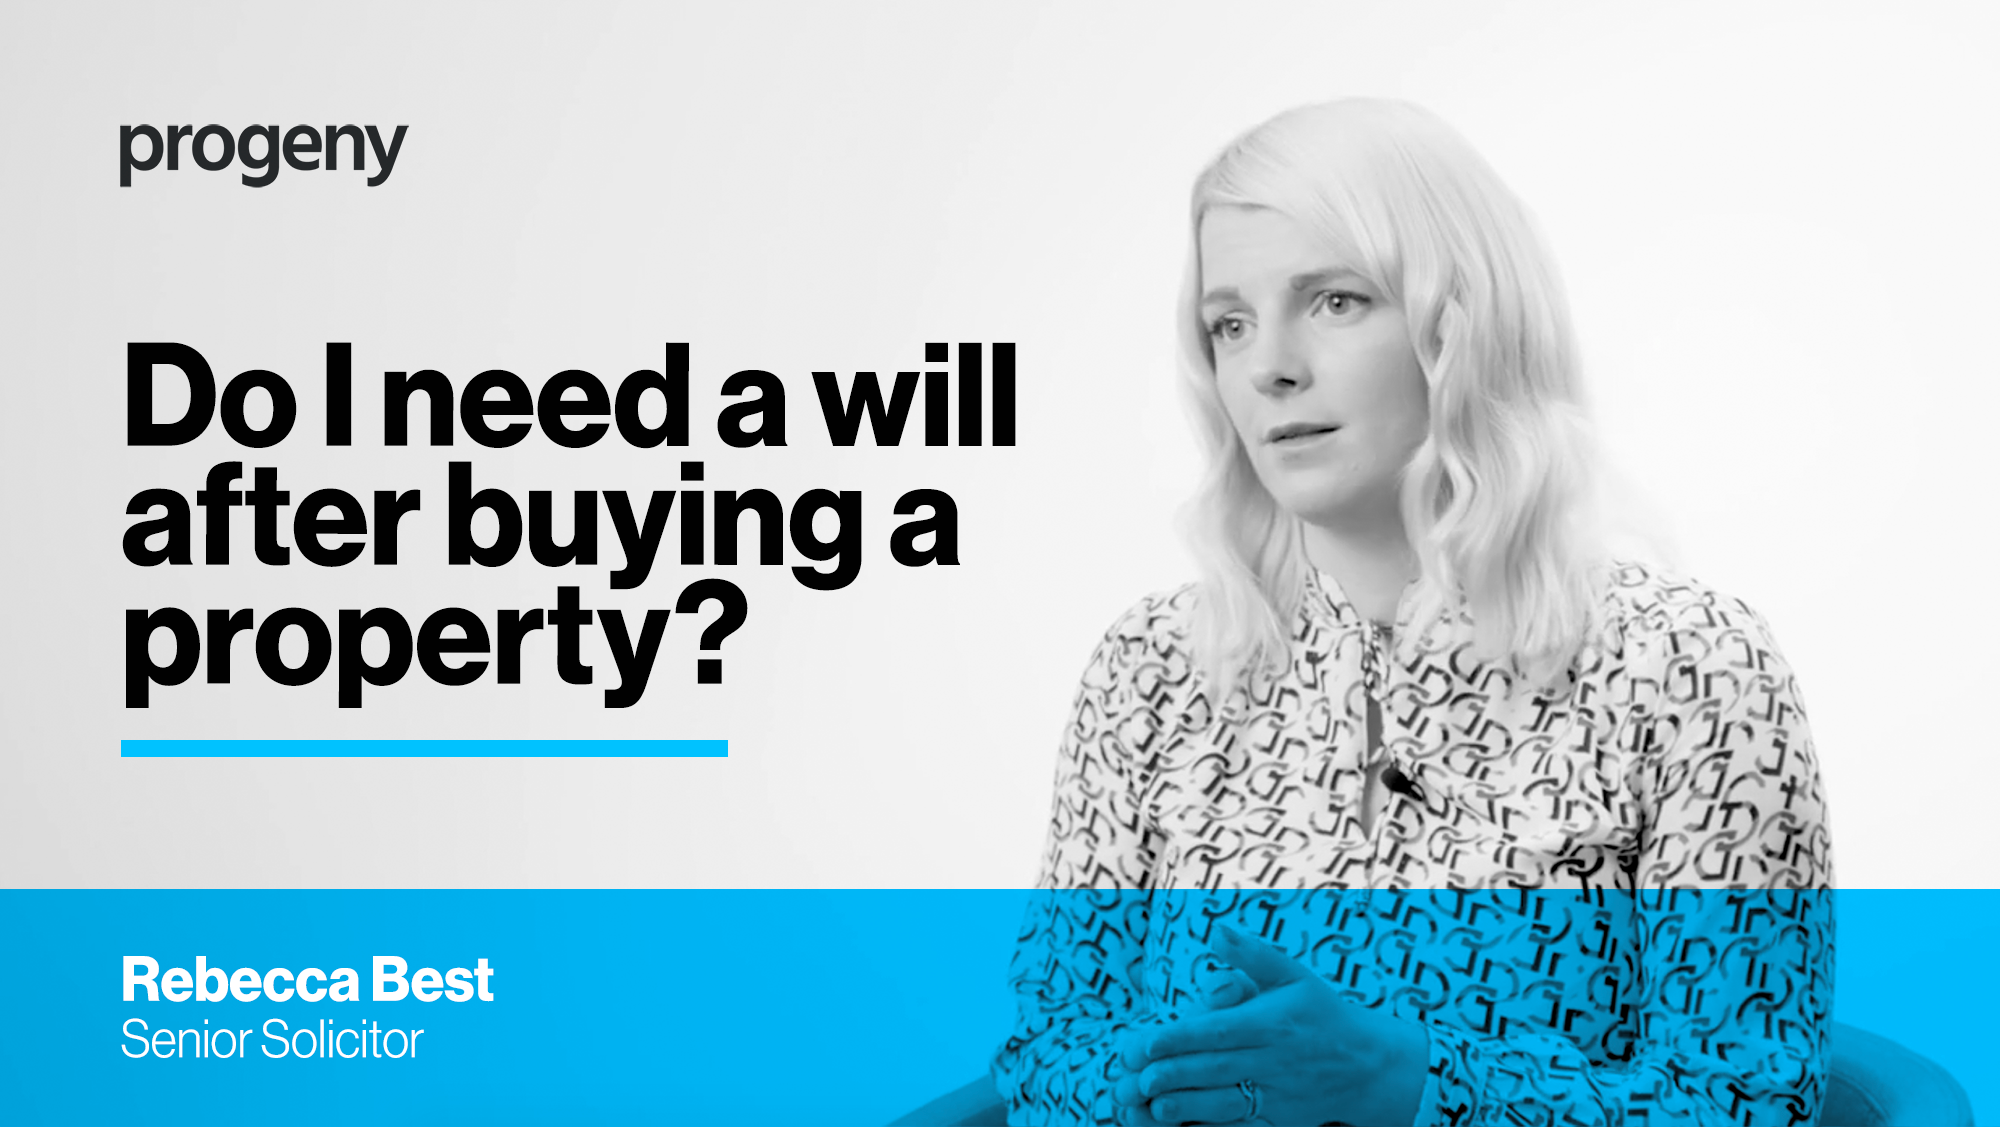 Do I need a will after buying a property?